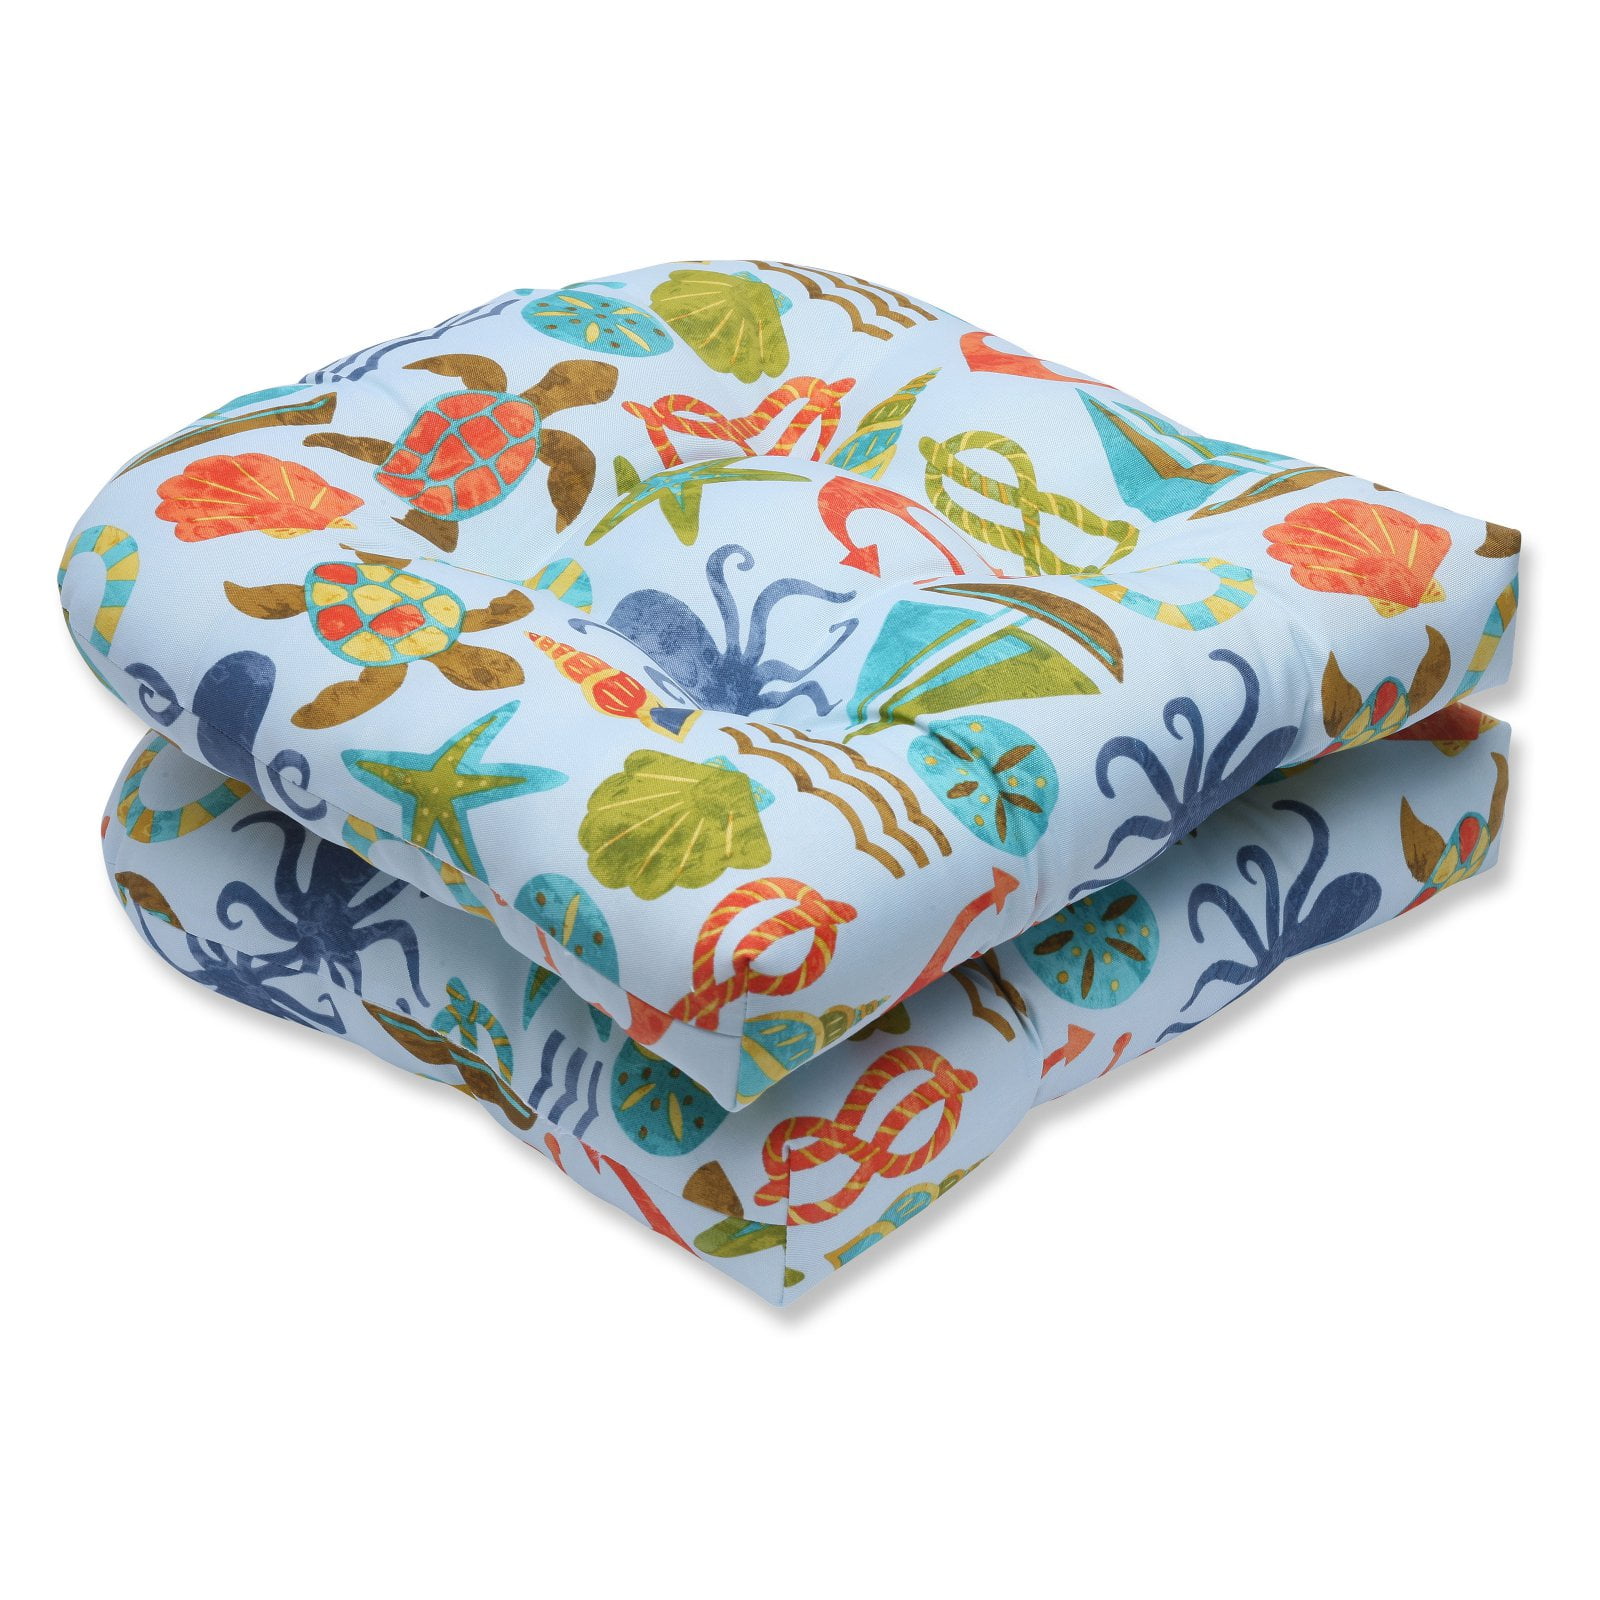 Pillow Perfect Outdoor/ Indoor Seapoint Blue Summer Wicker Seat Cushion